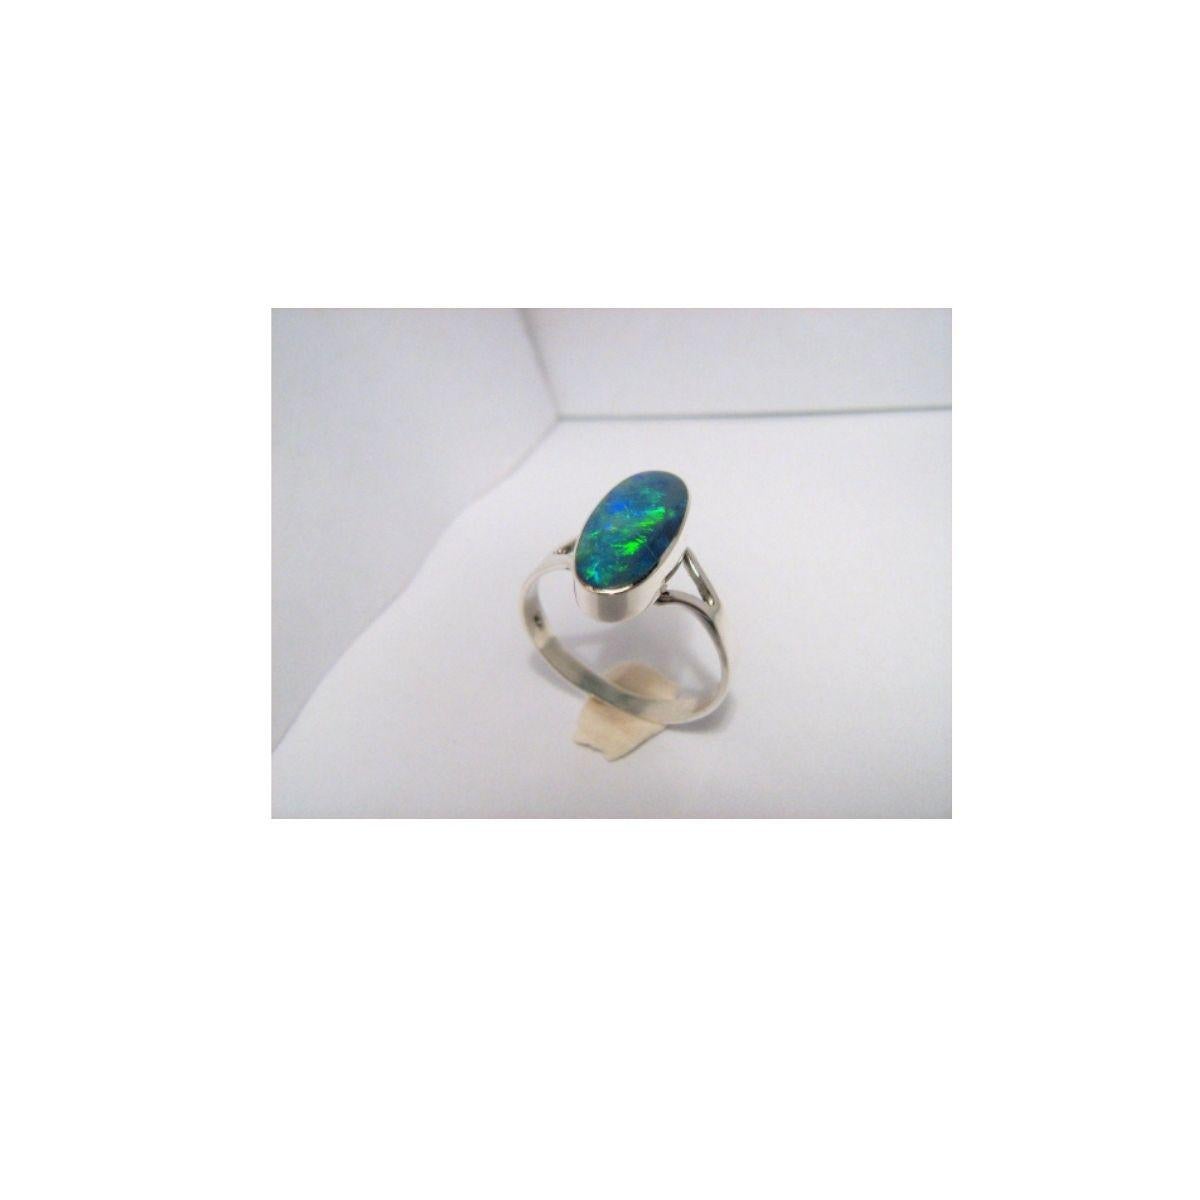 AUSTRALIAN OPAL RING STERLING SILVER WHICH SHOWS OFF VERY BRIGHT COLORS  BLUE GREEN YELLOW AND IF YOU NEED A DIFFERNT SIZE LET US KNOW.


WEIGHT: 2 grams (whole ring) gem opal weight is approximately 0.7 carat.
SIZE: US size 7 but can be resized for